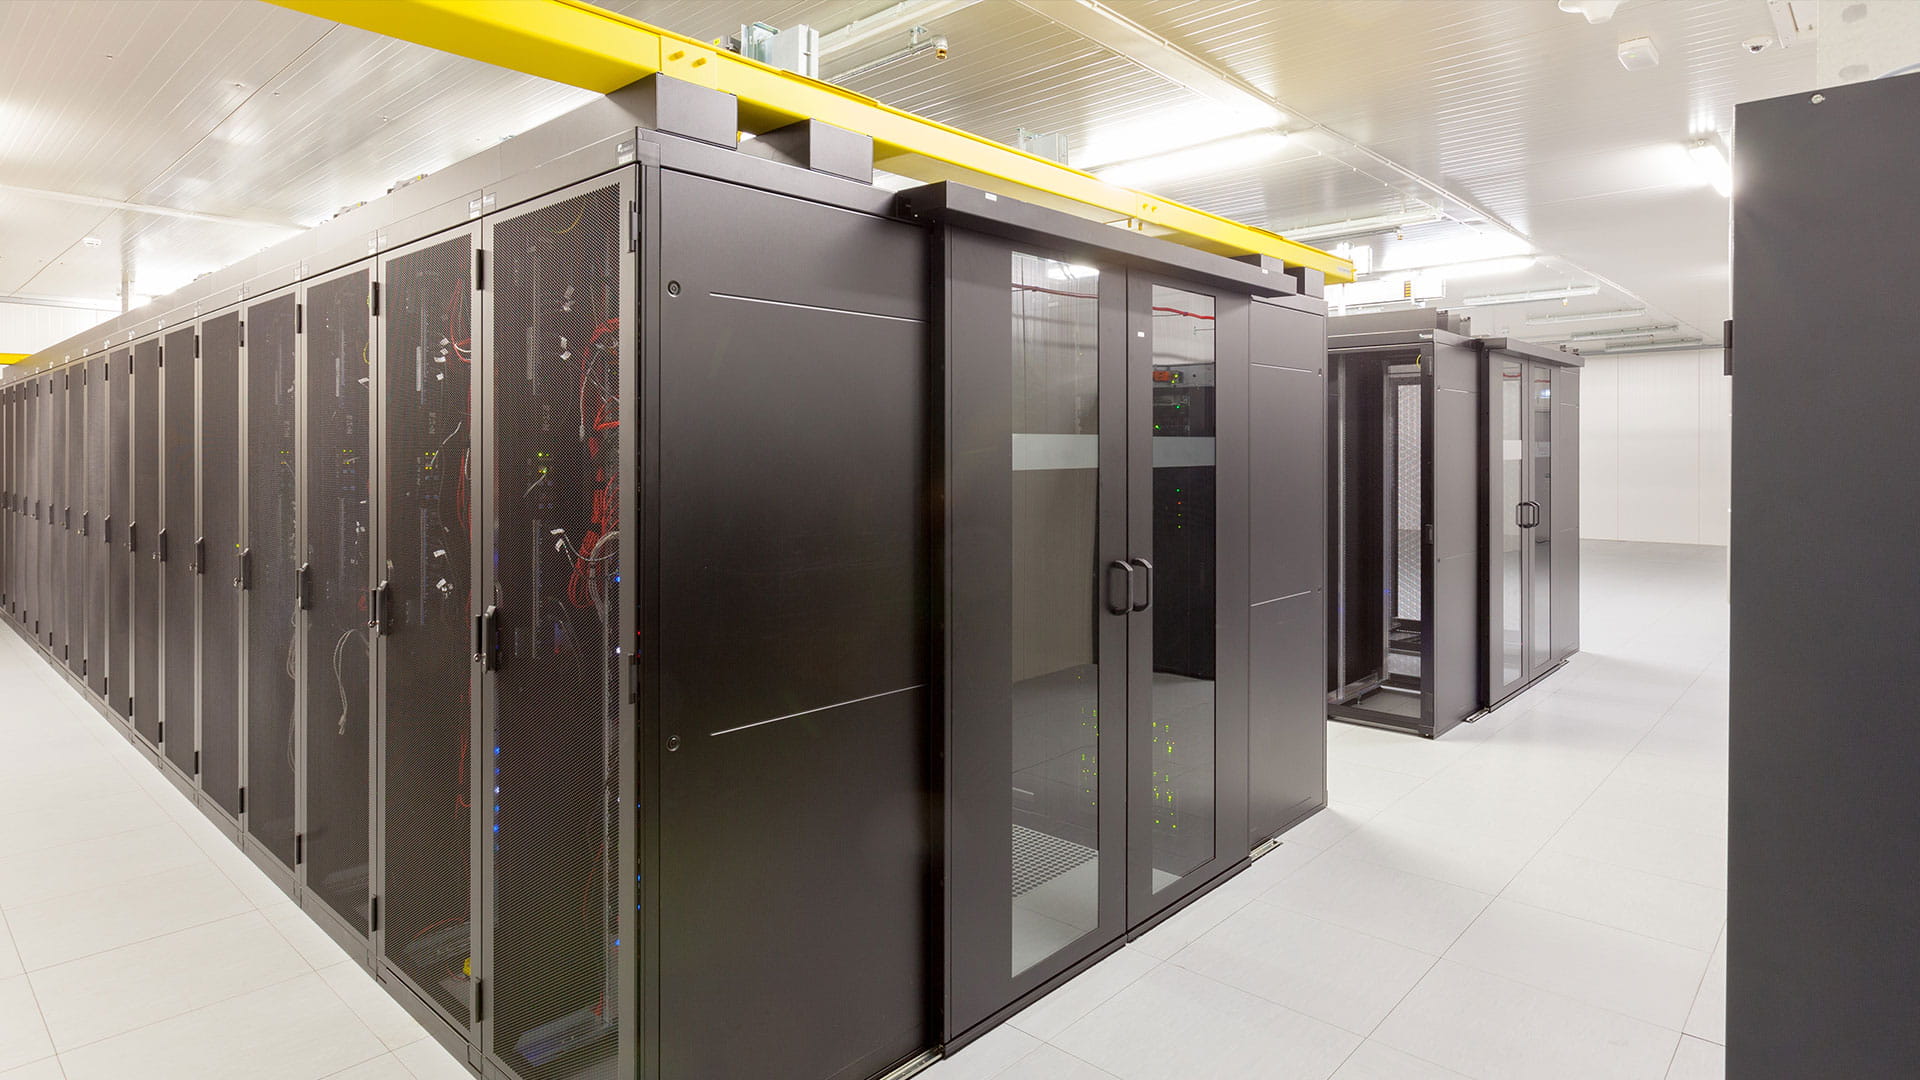 A room filled with server racks, meticulously organized and maintained to meet specific standards of reliability and performance, as defined by the data centre tier rating system.